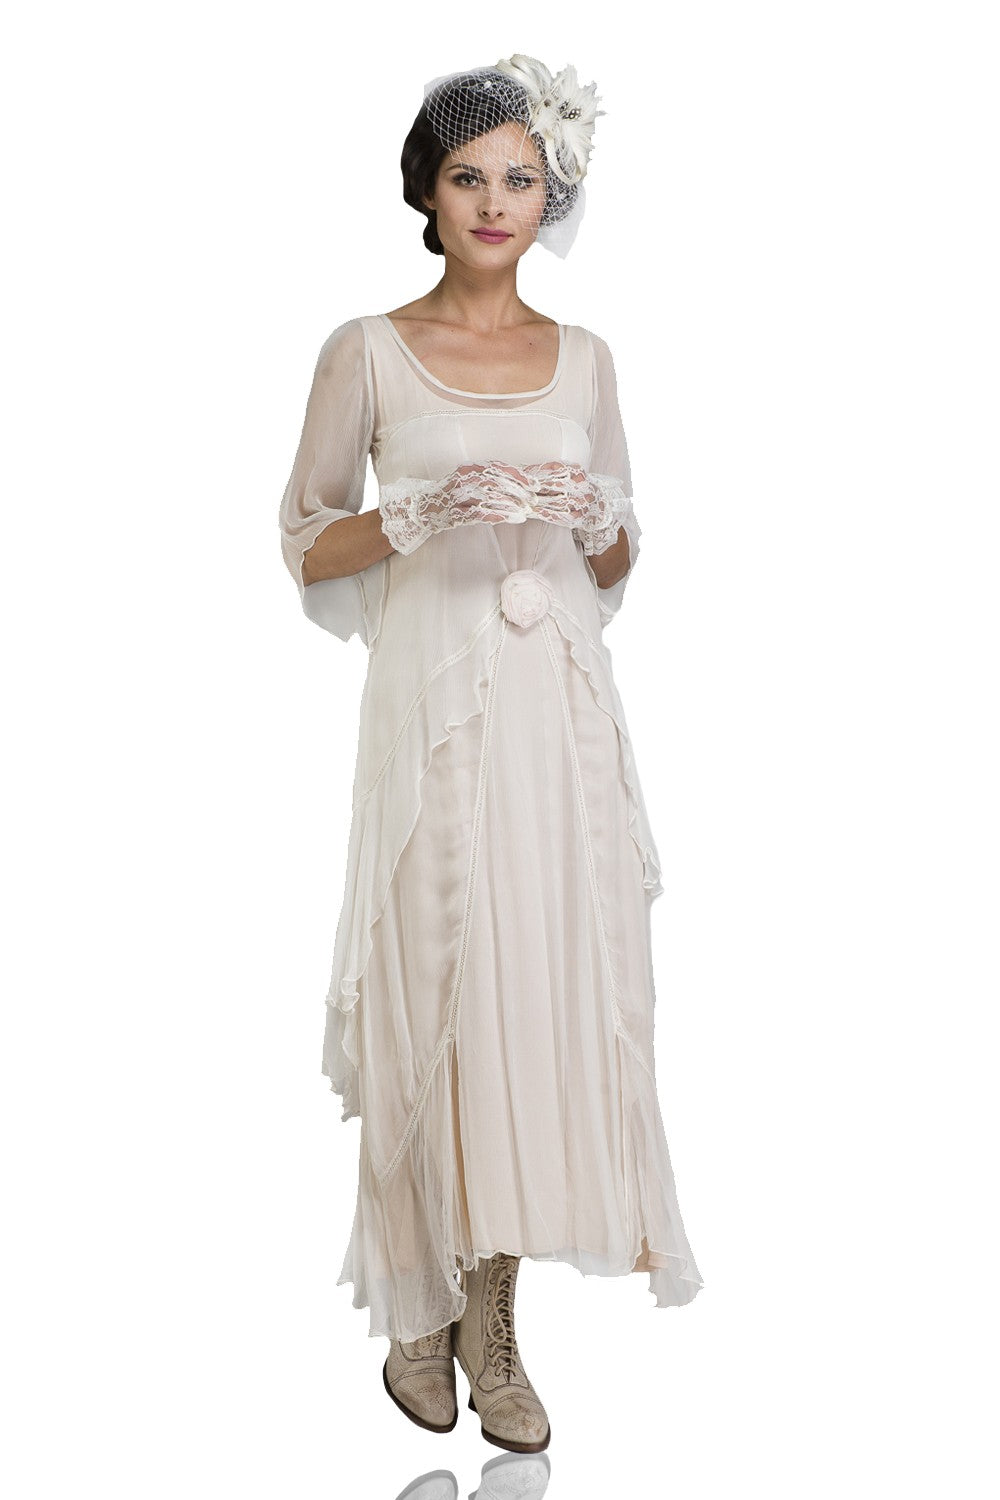 Great Gatsby Dress – Great Gatsby Dresses for Sale Great Gatsby Party Dress in Ivory by Nataya $249.00 AT vintagedancer.com